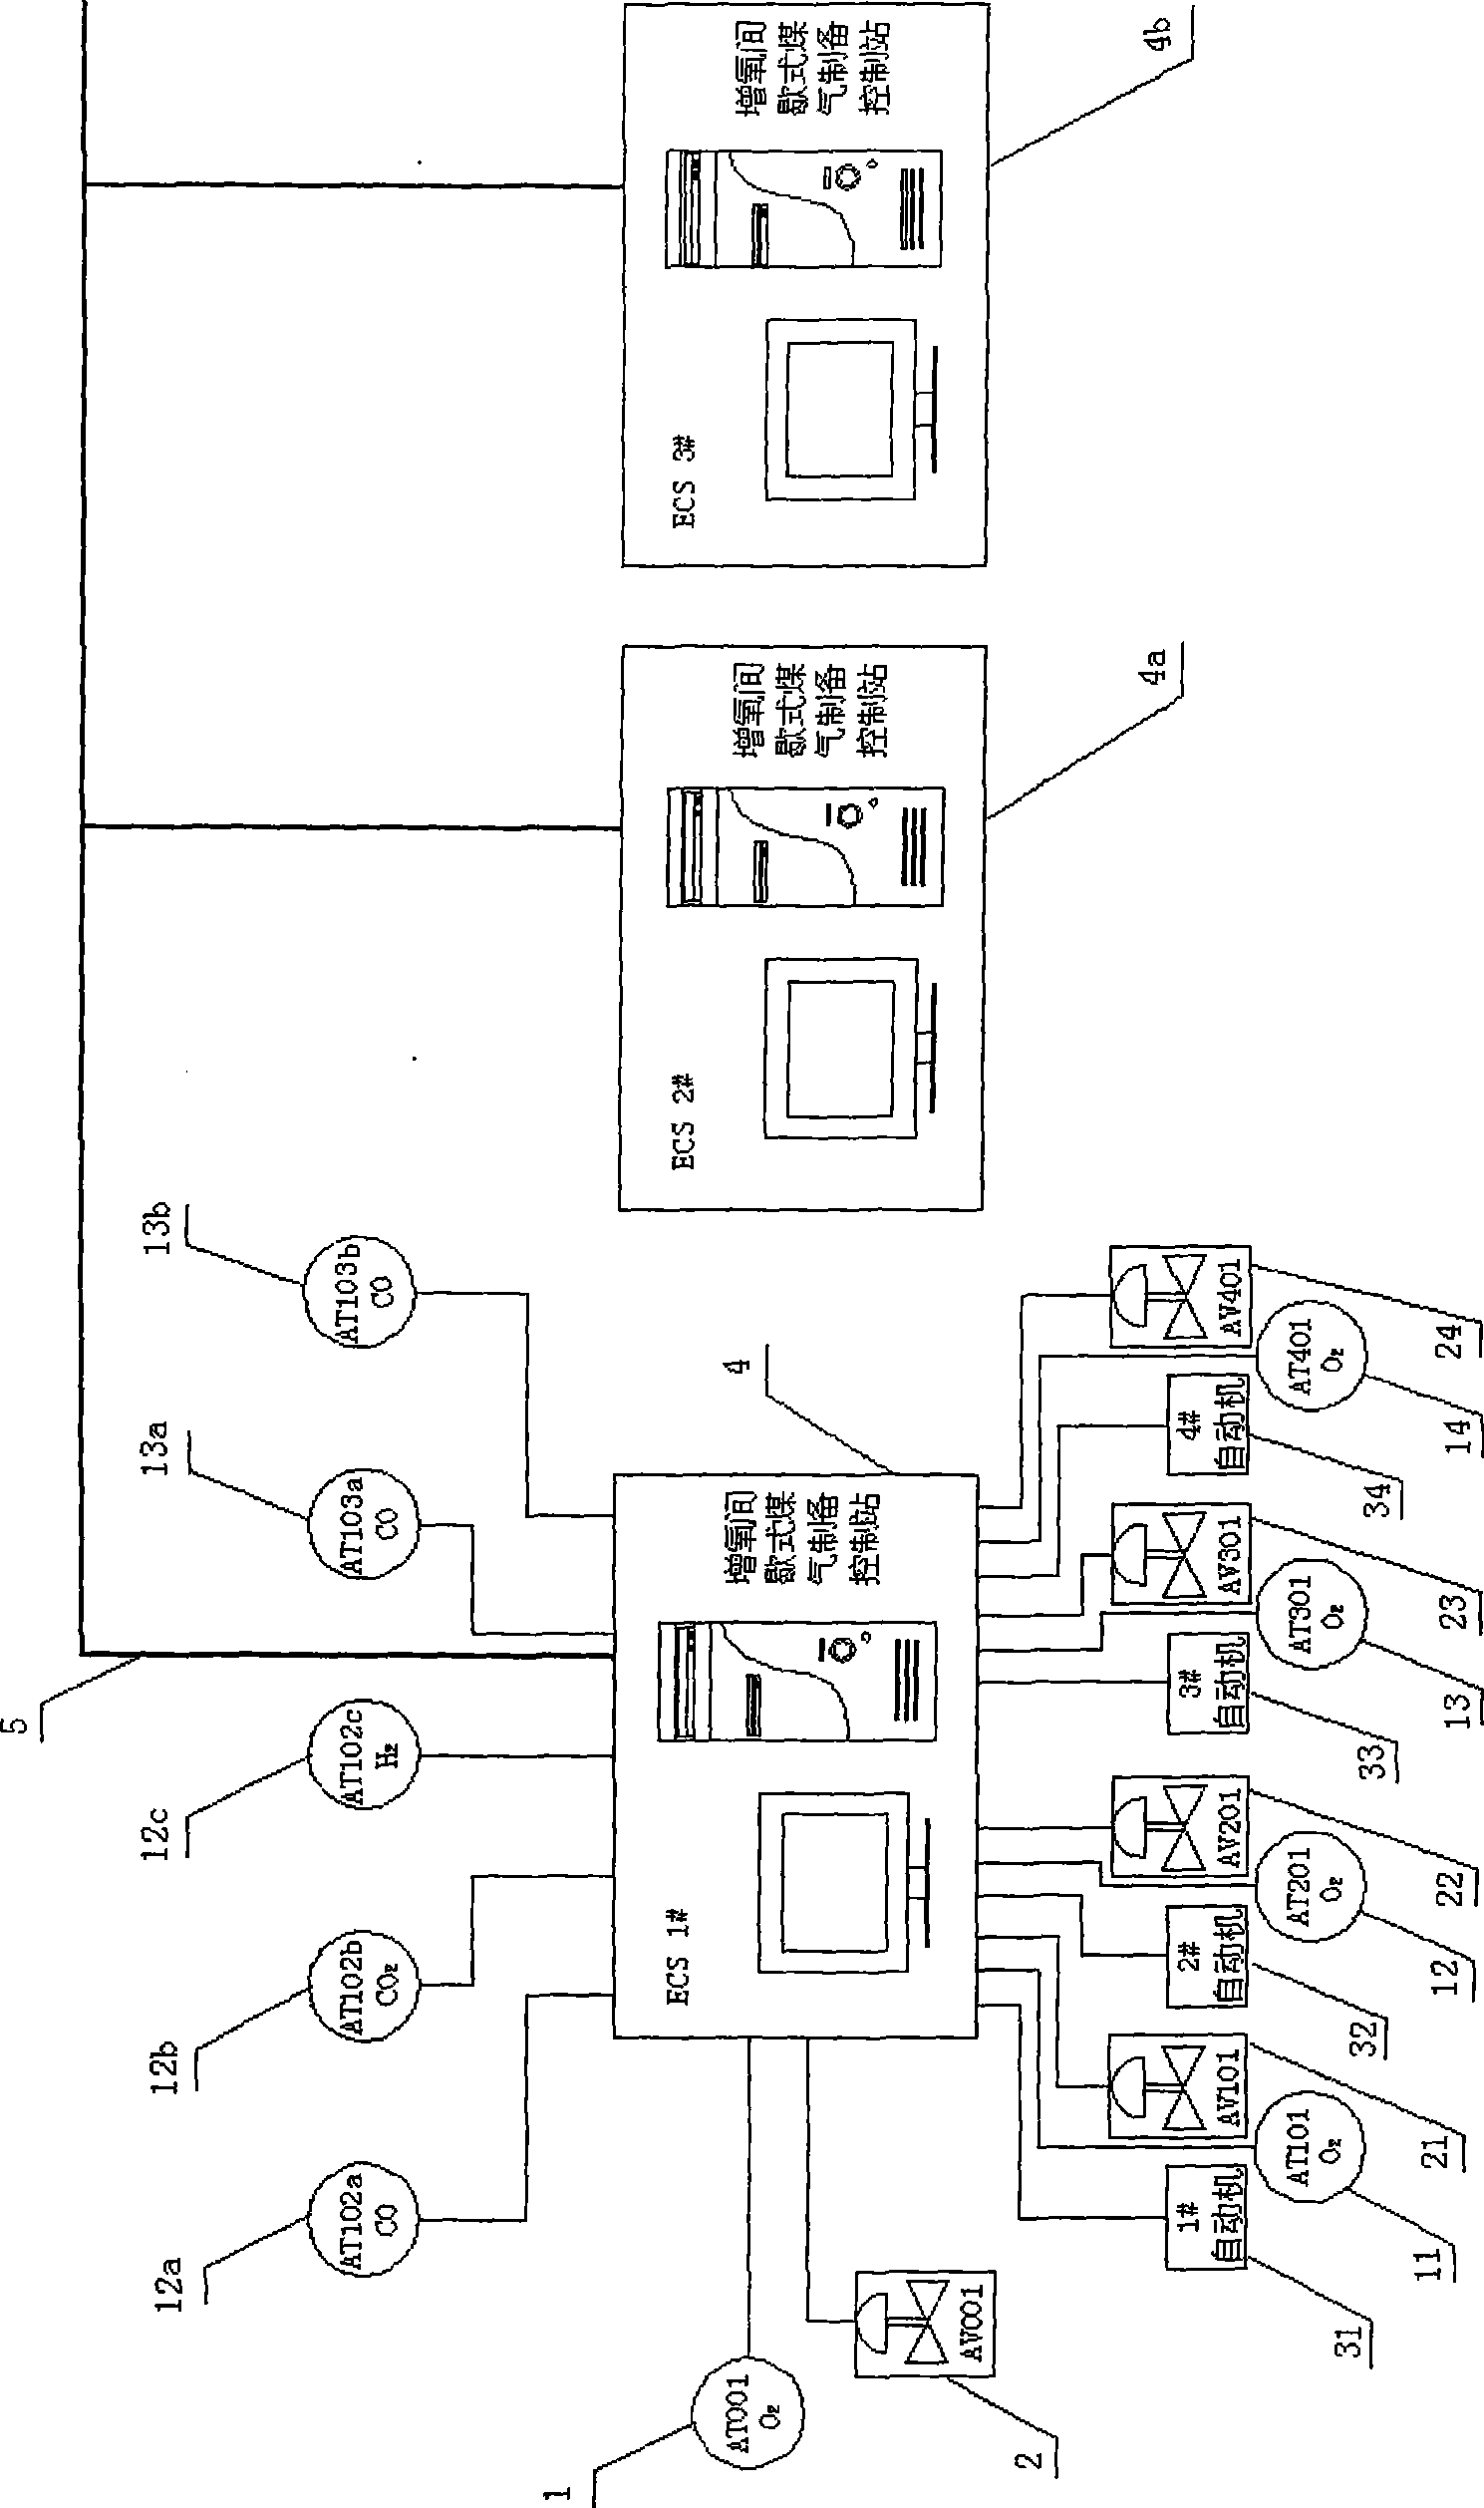 Control device for oxygenation intermittent coal gas preparation